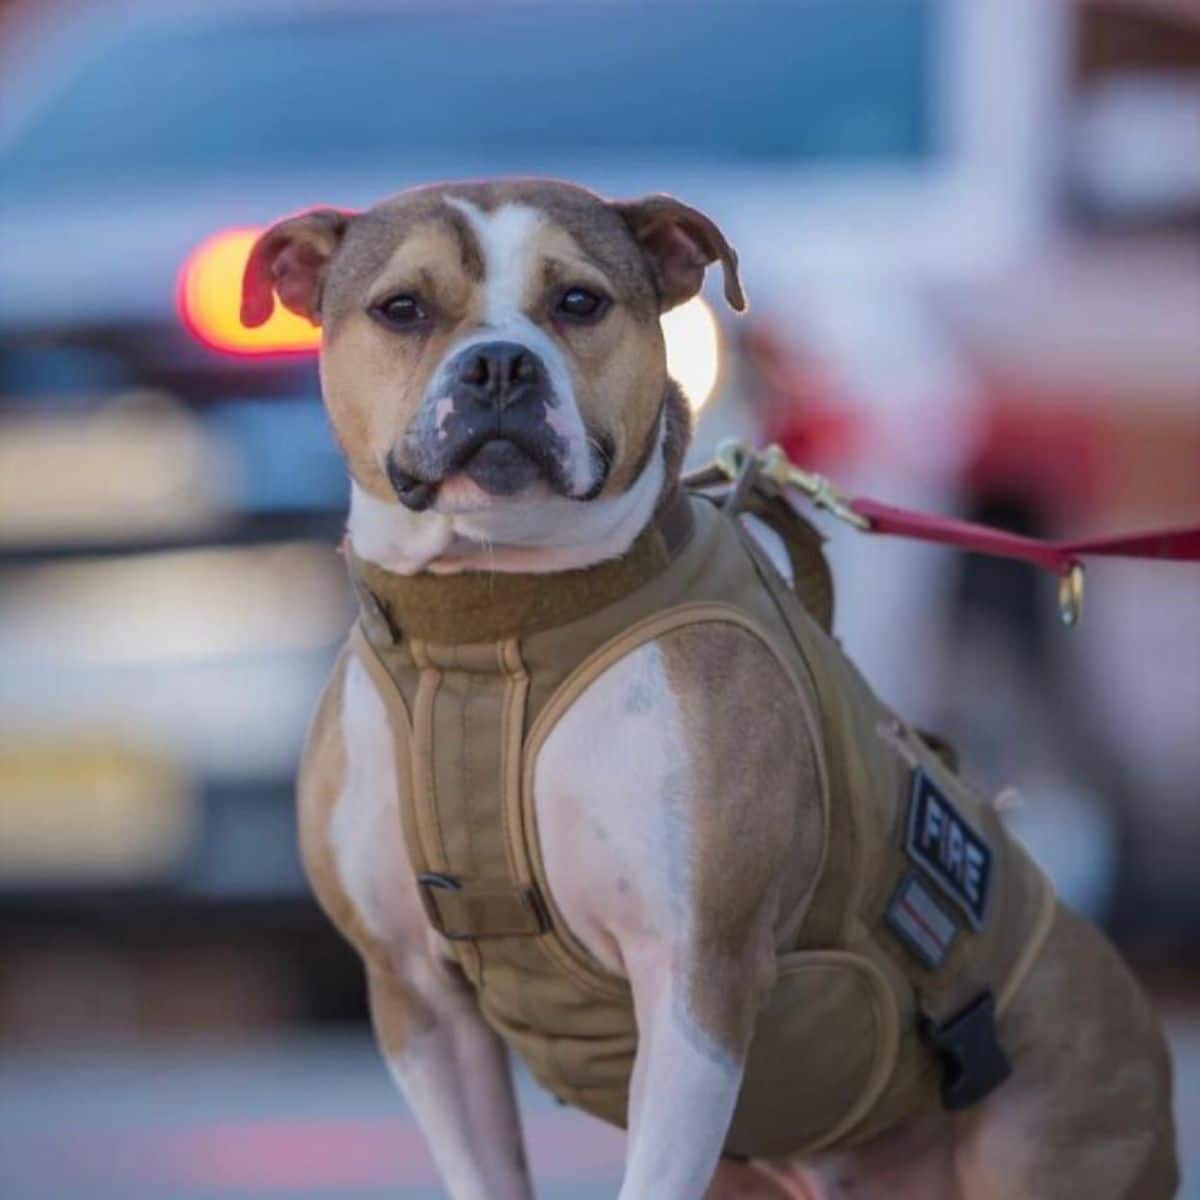 brown and white pit bull wearing a brown harness and red leash